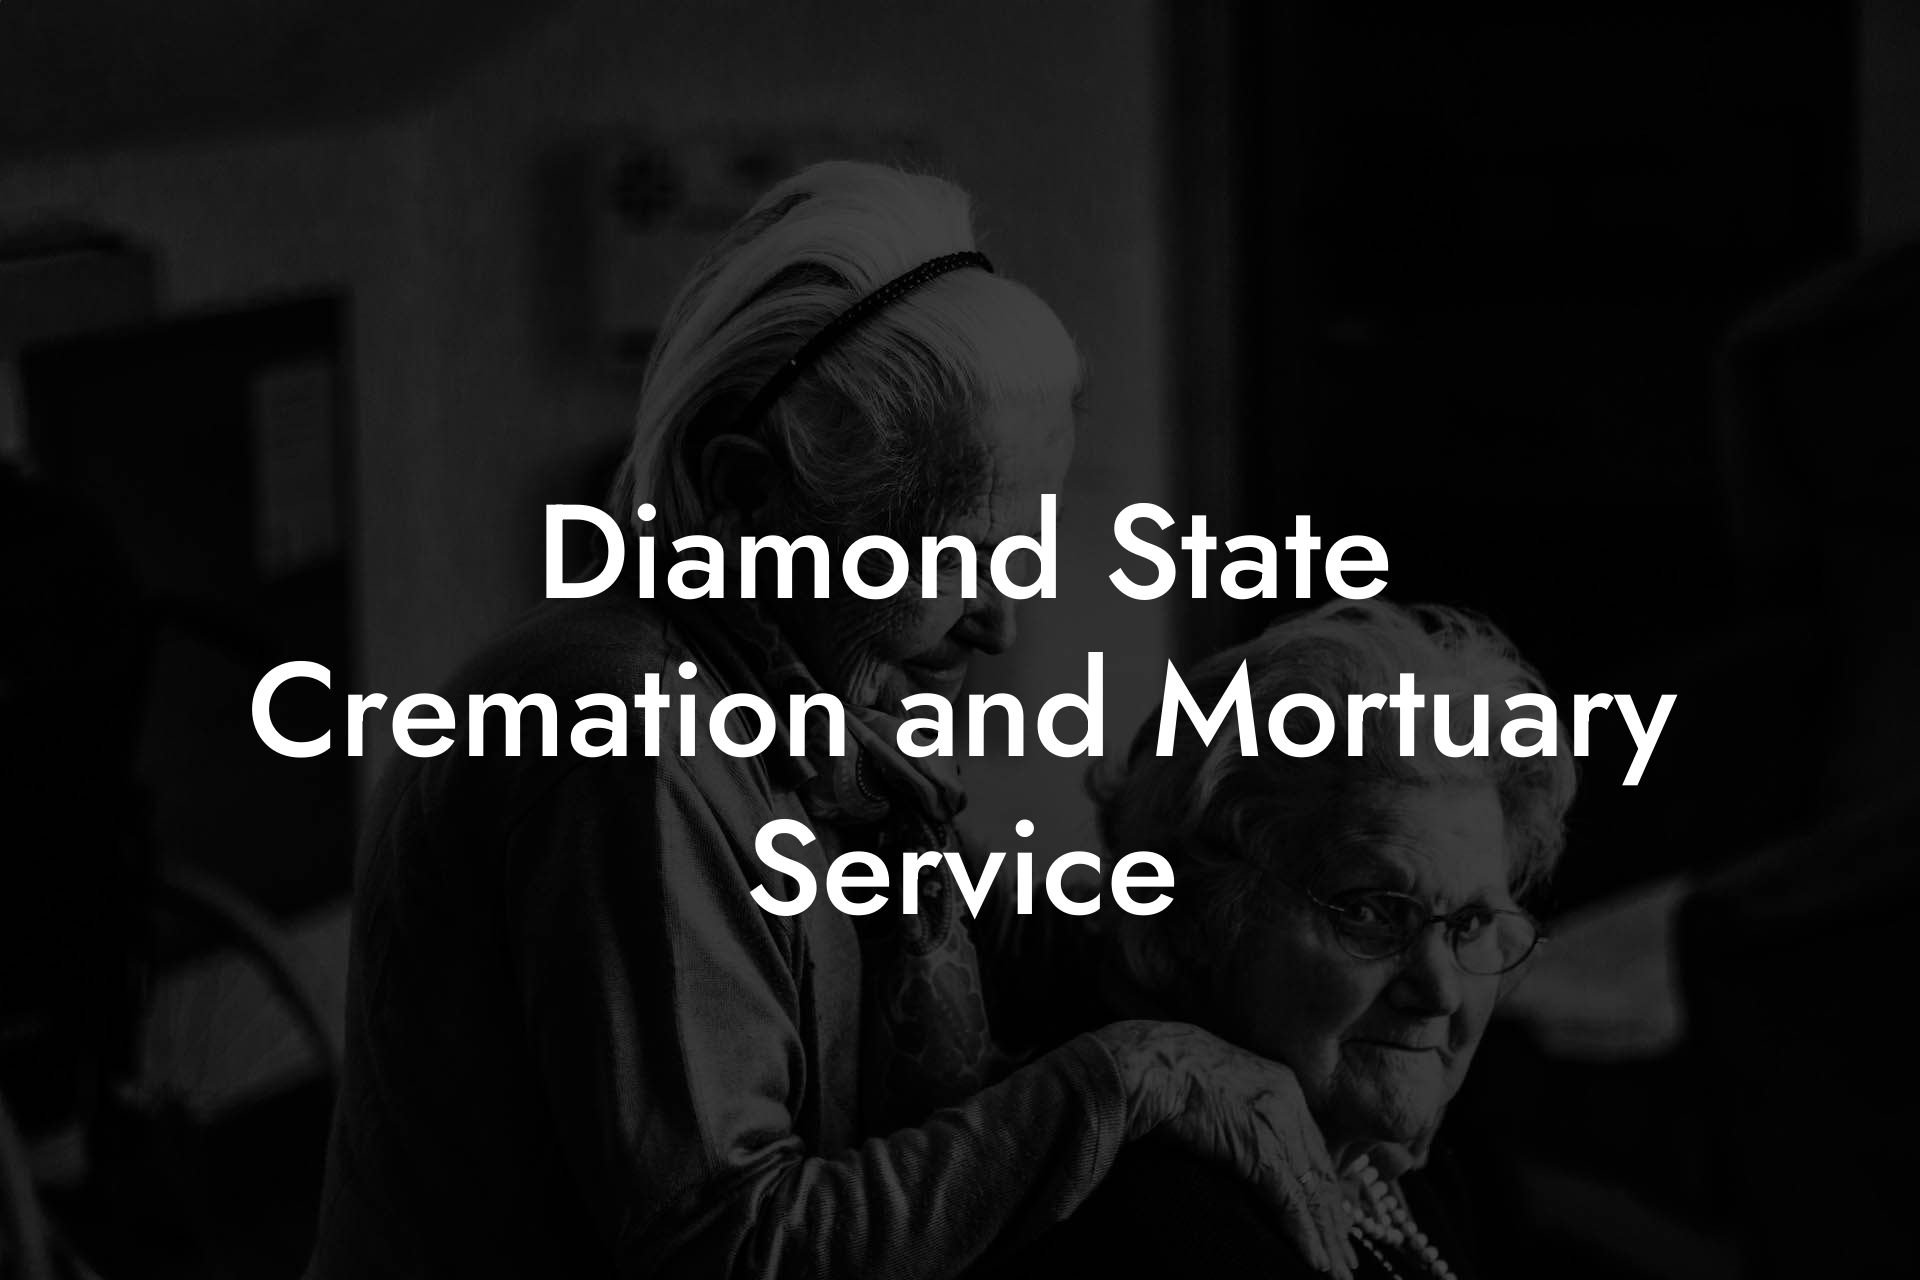 Diamond State Cremation and Mortuary Service